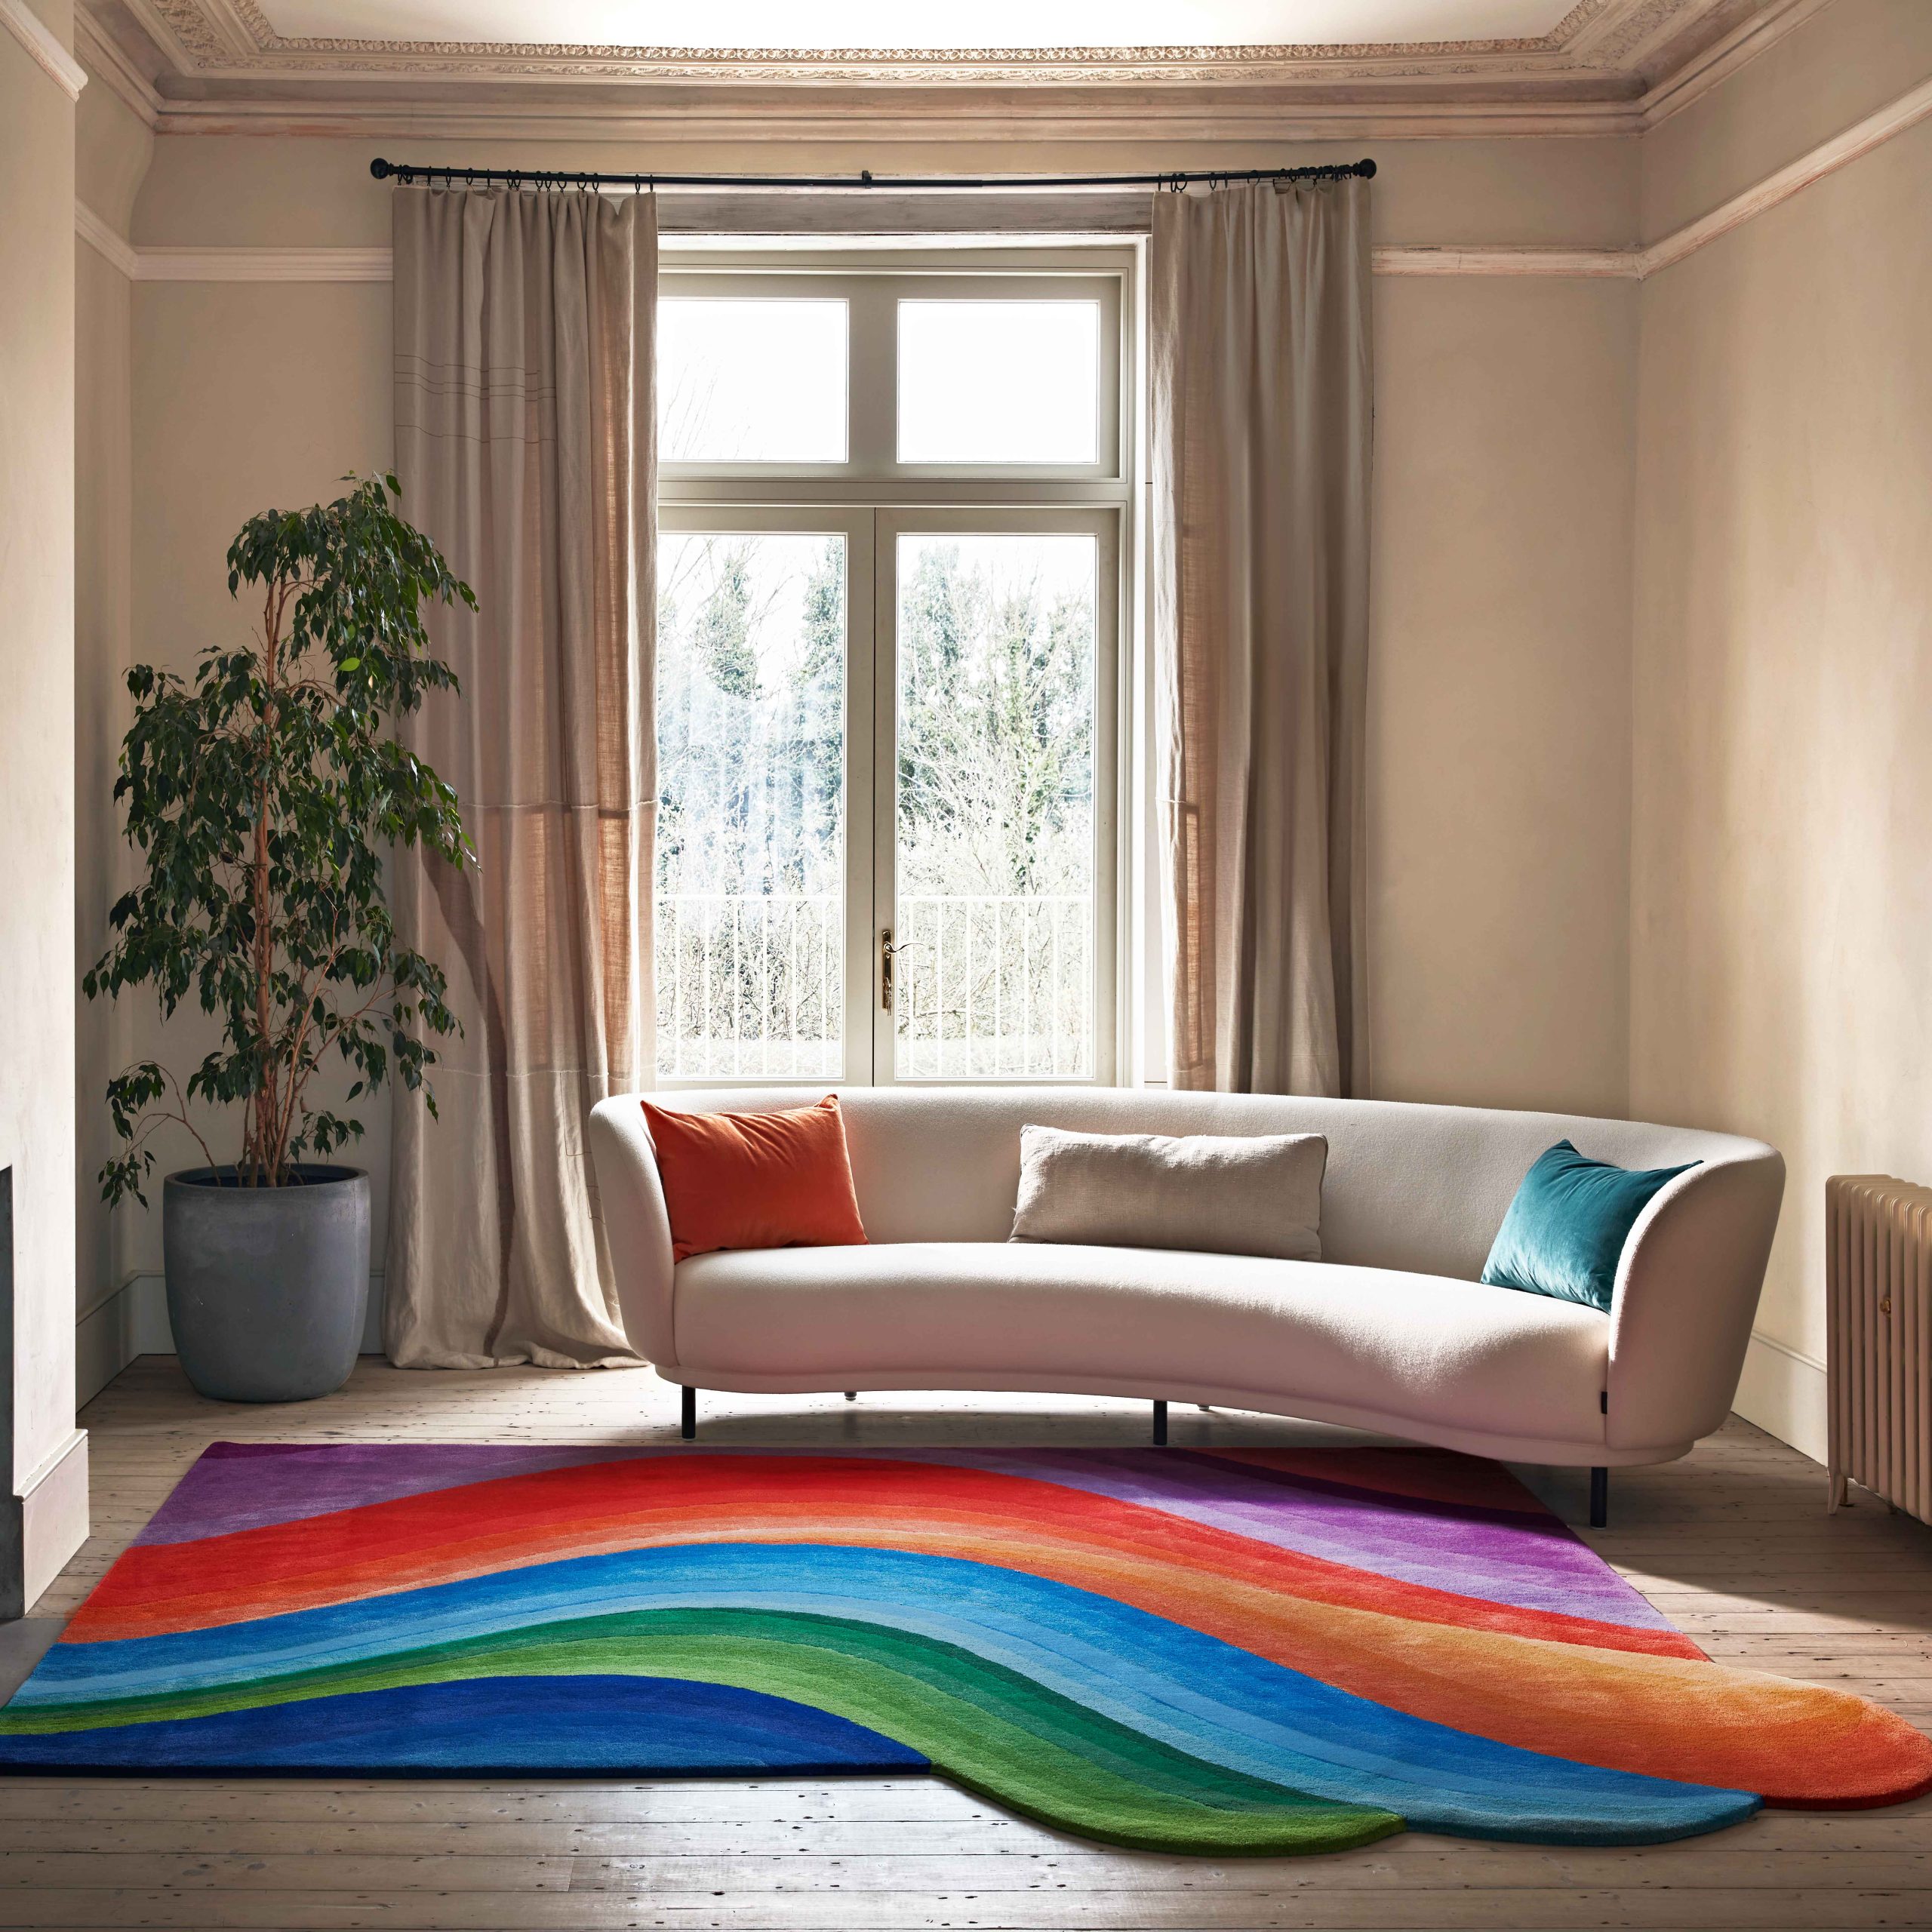 https://sonyawinner.com/wp-content/uploads/2020/03/Contemporary-Colourful-Rainbow-Wave-Rug-scaled.jpg